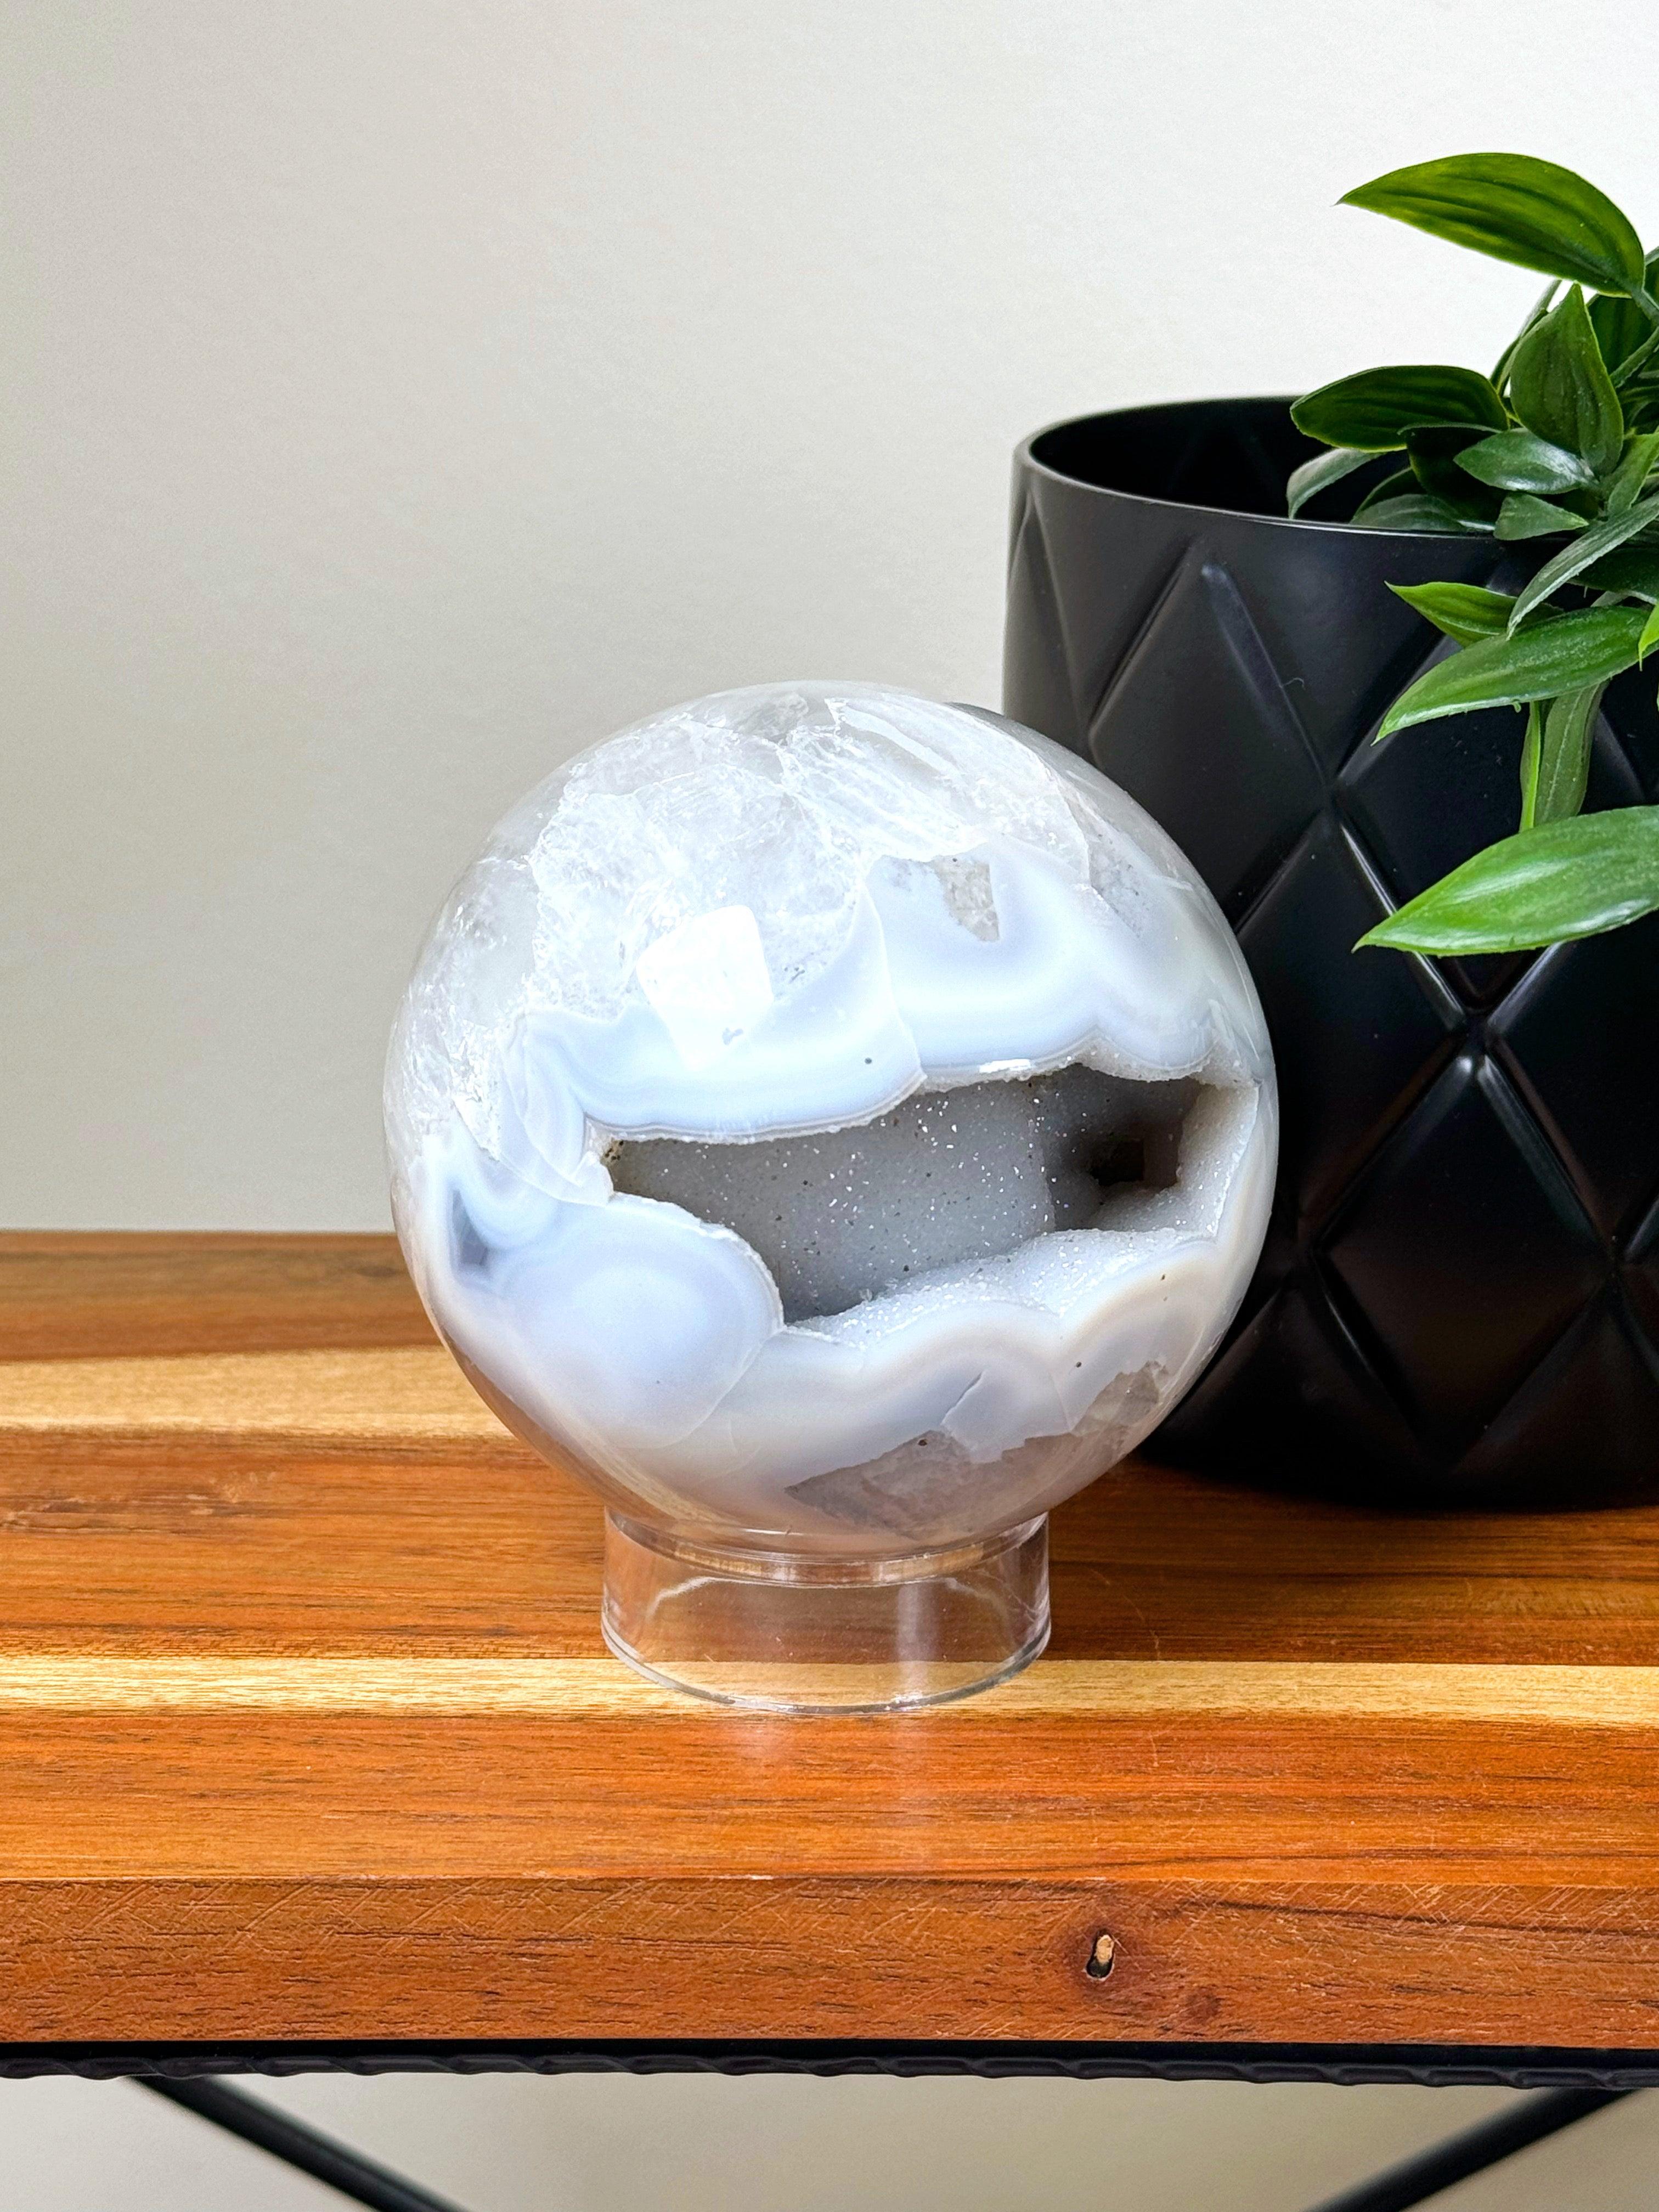 DRUZY AGATE SPHERE 2 - agate, druzy agate, googly agate, googly eye, googly eye agate, one of a kind, sphere, statement piece - The Mineral Maven